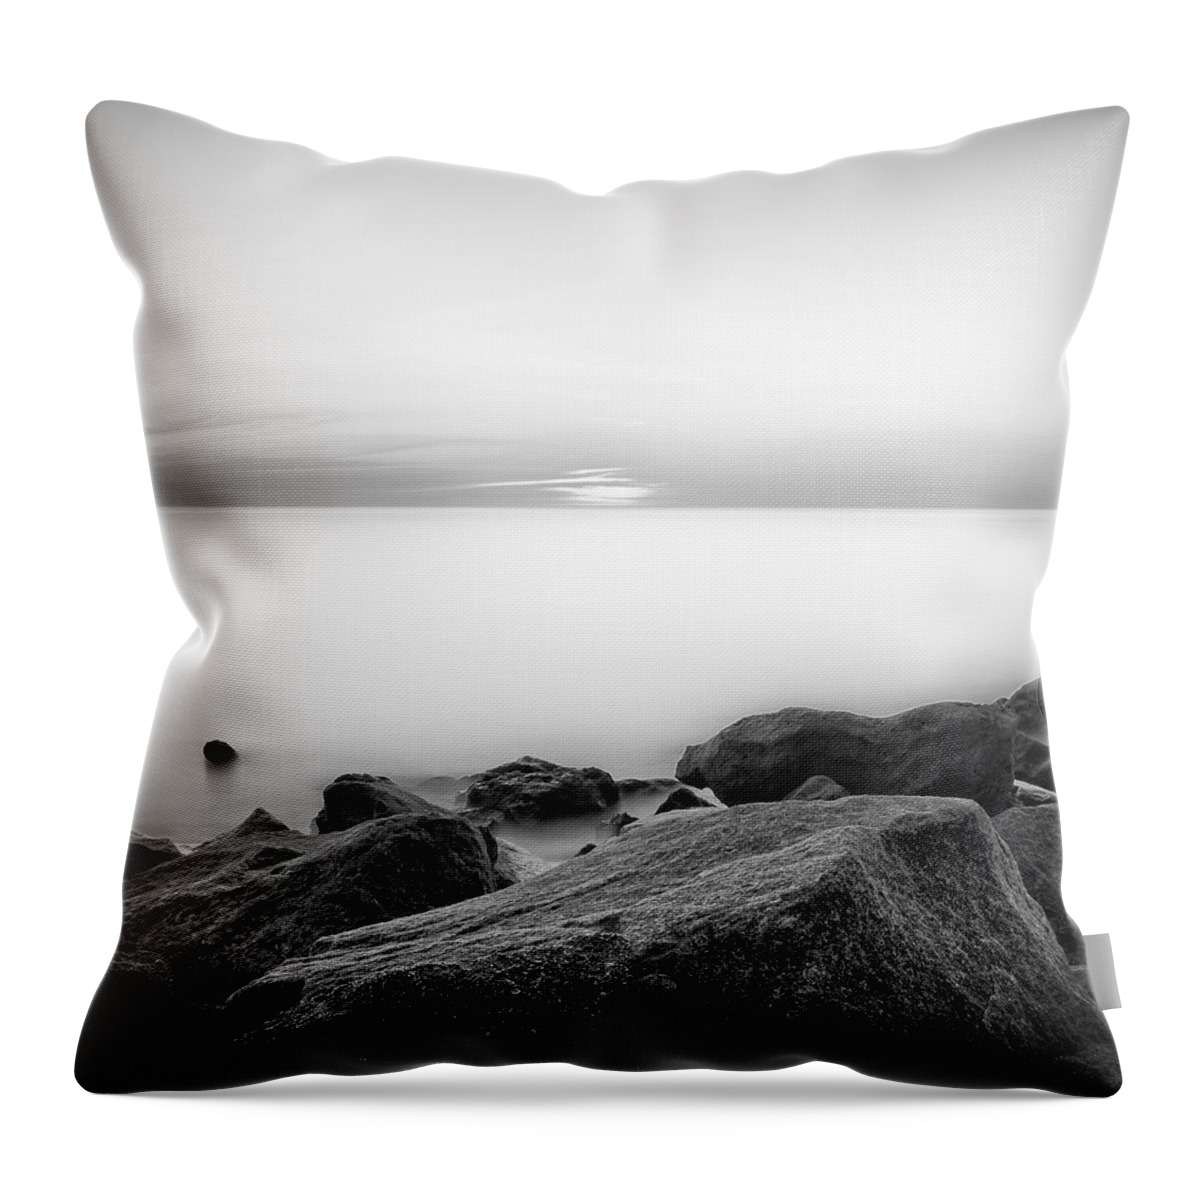 Ocean Throw Pillow featuring the photograph The Radiance by Evelina Kremsdorf